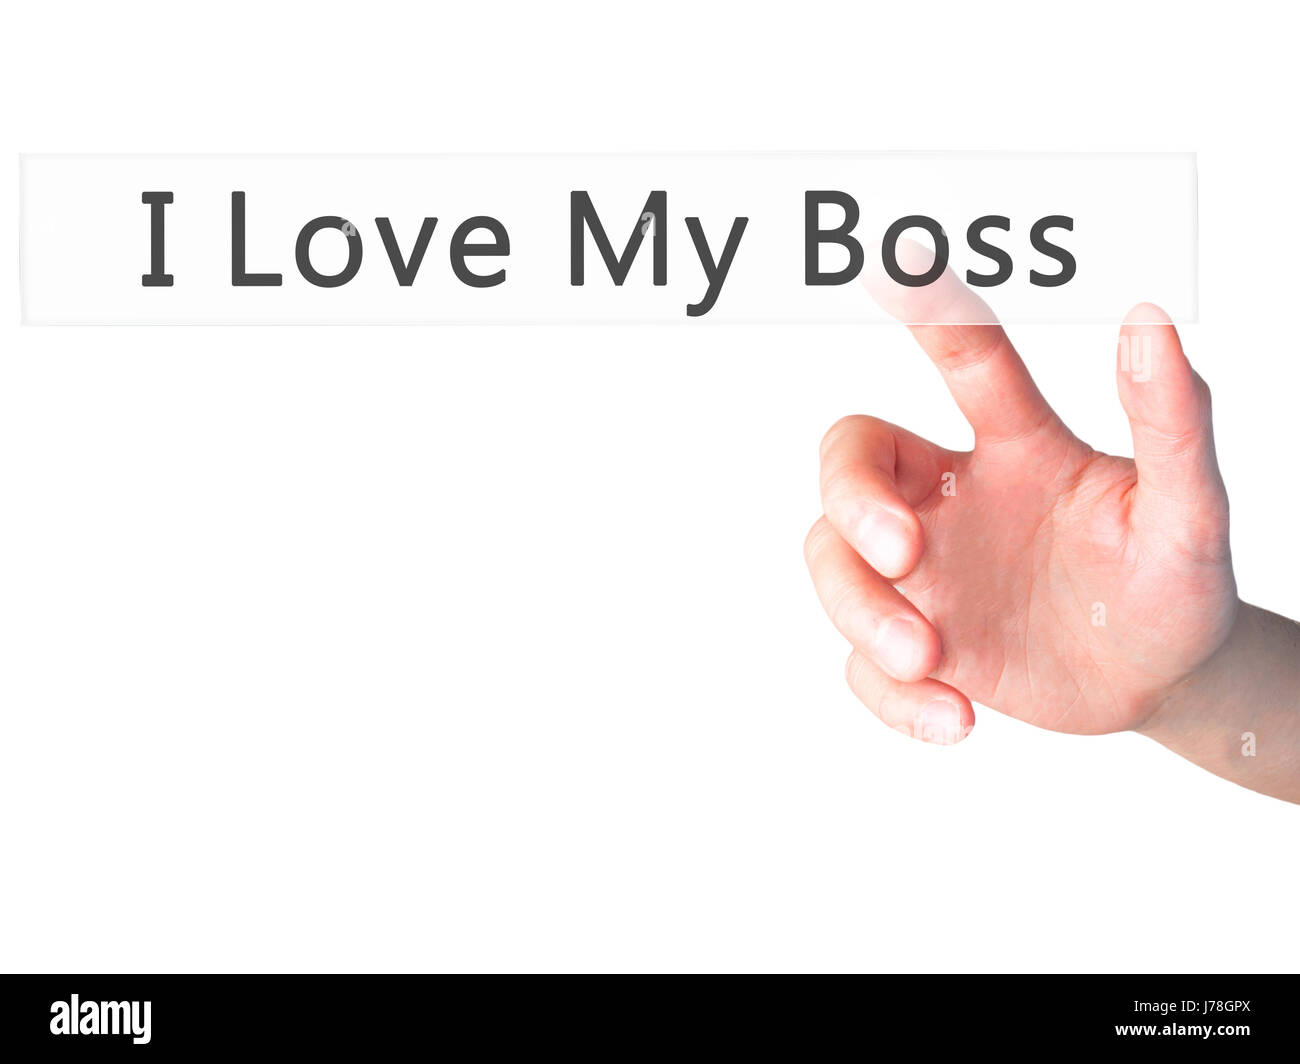 I Love My Boss - Hand pressing a button on blurred background concept . Business, technology, internet concept. Stock Photo Stock Photo